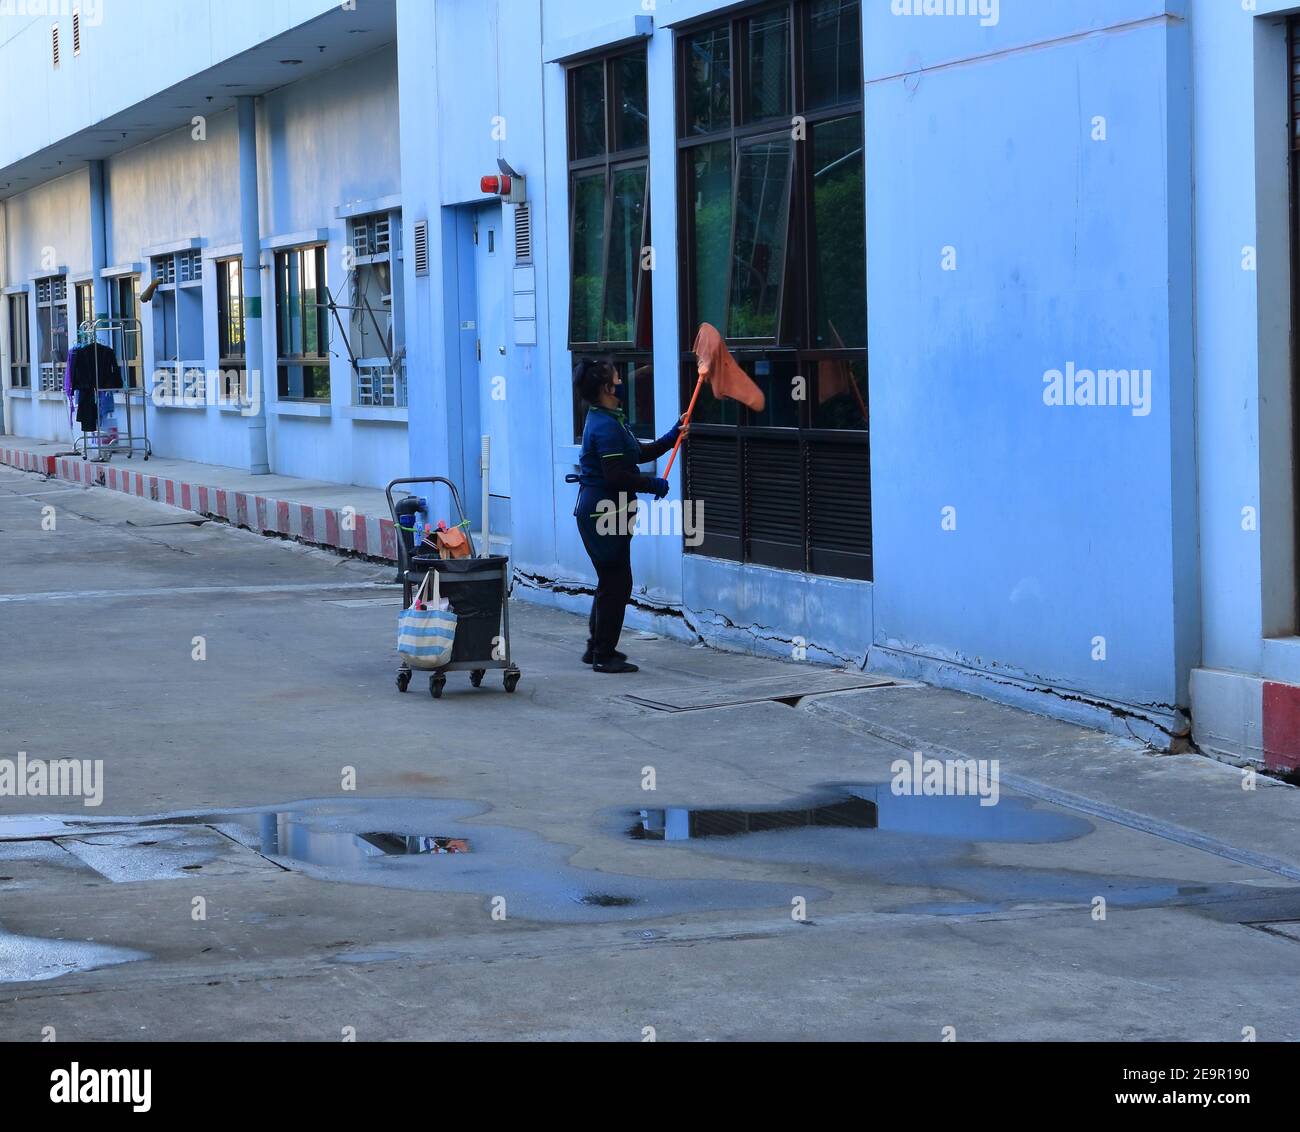 Bangkok, Thailand - February 2, 2021 : Blurred motion of female worker wearing face mask using mop with cloth to wipe glass window outside a building Stock Photo